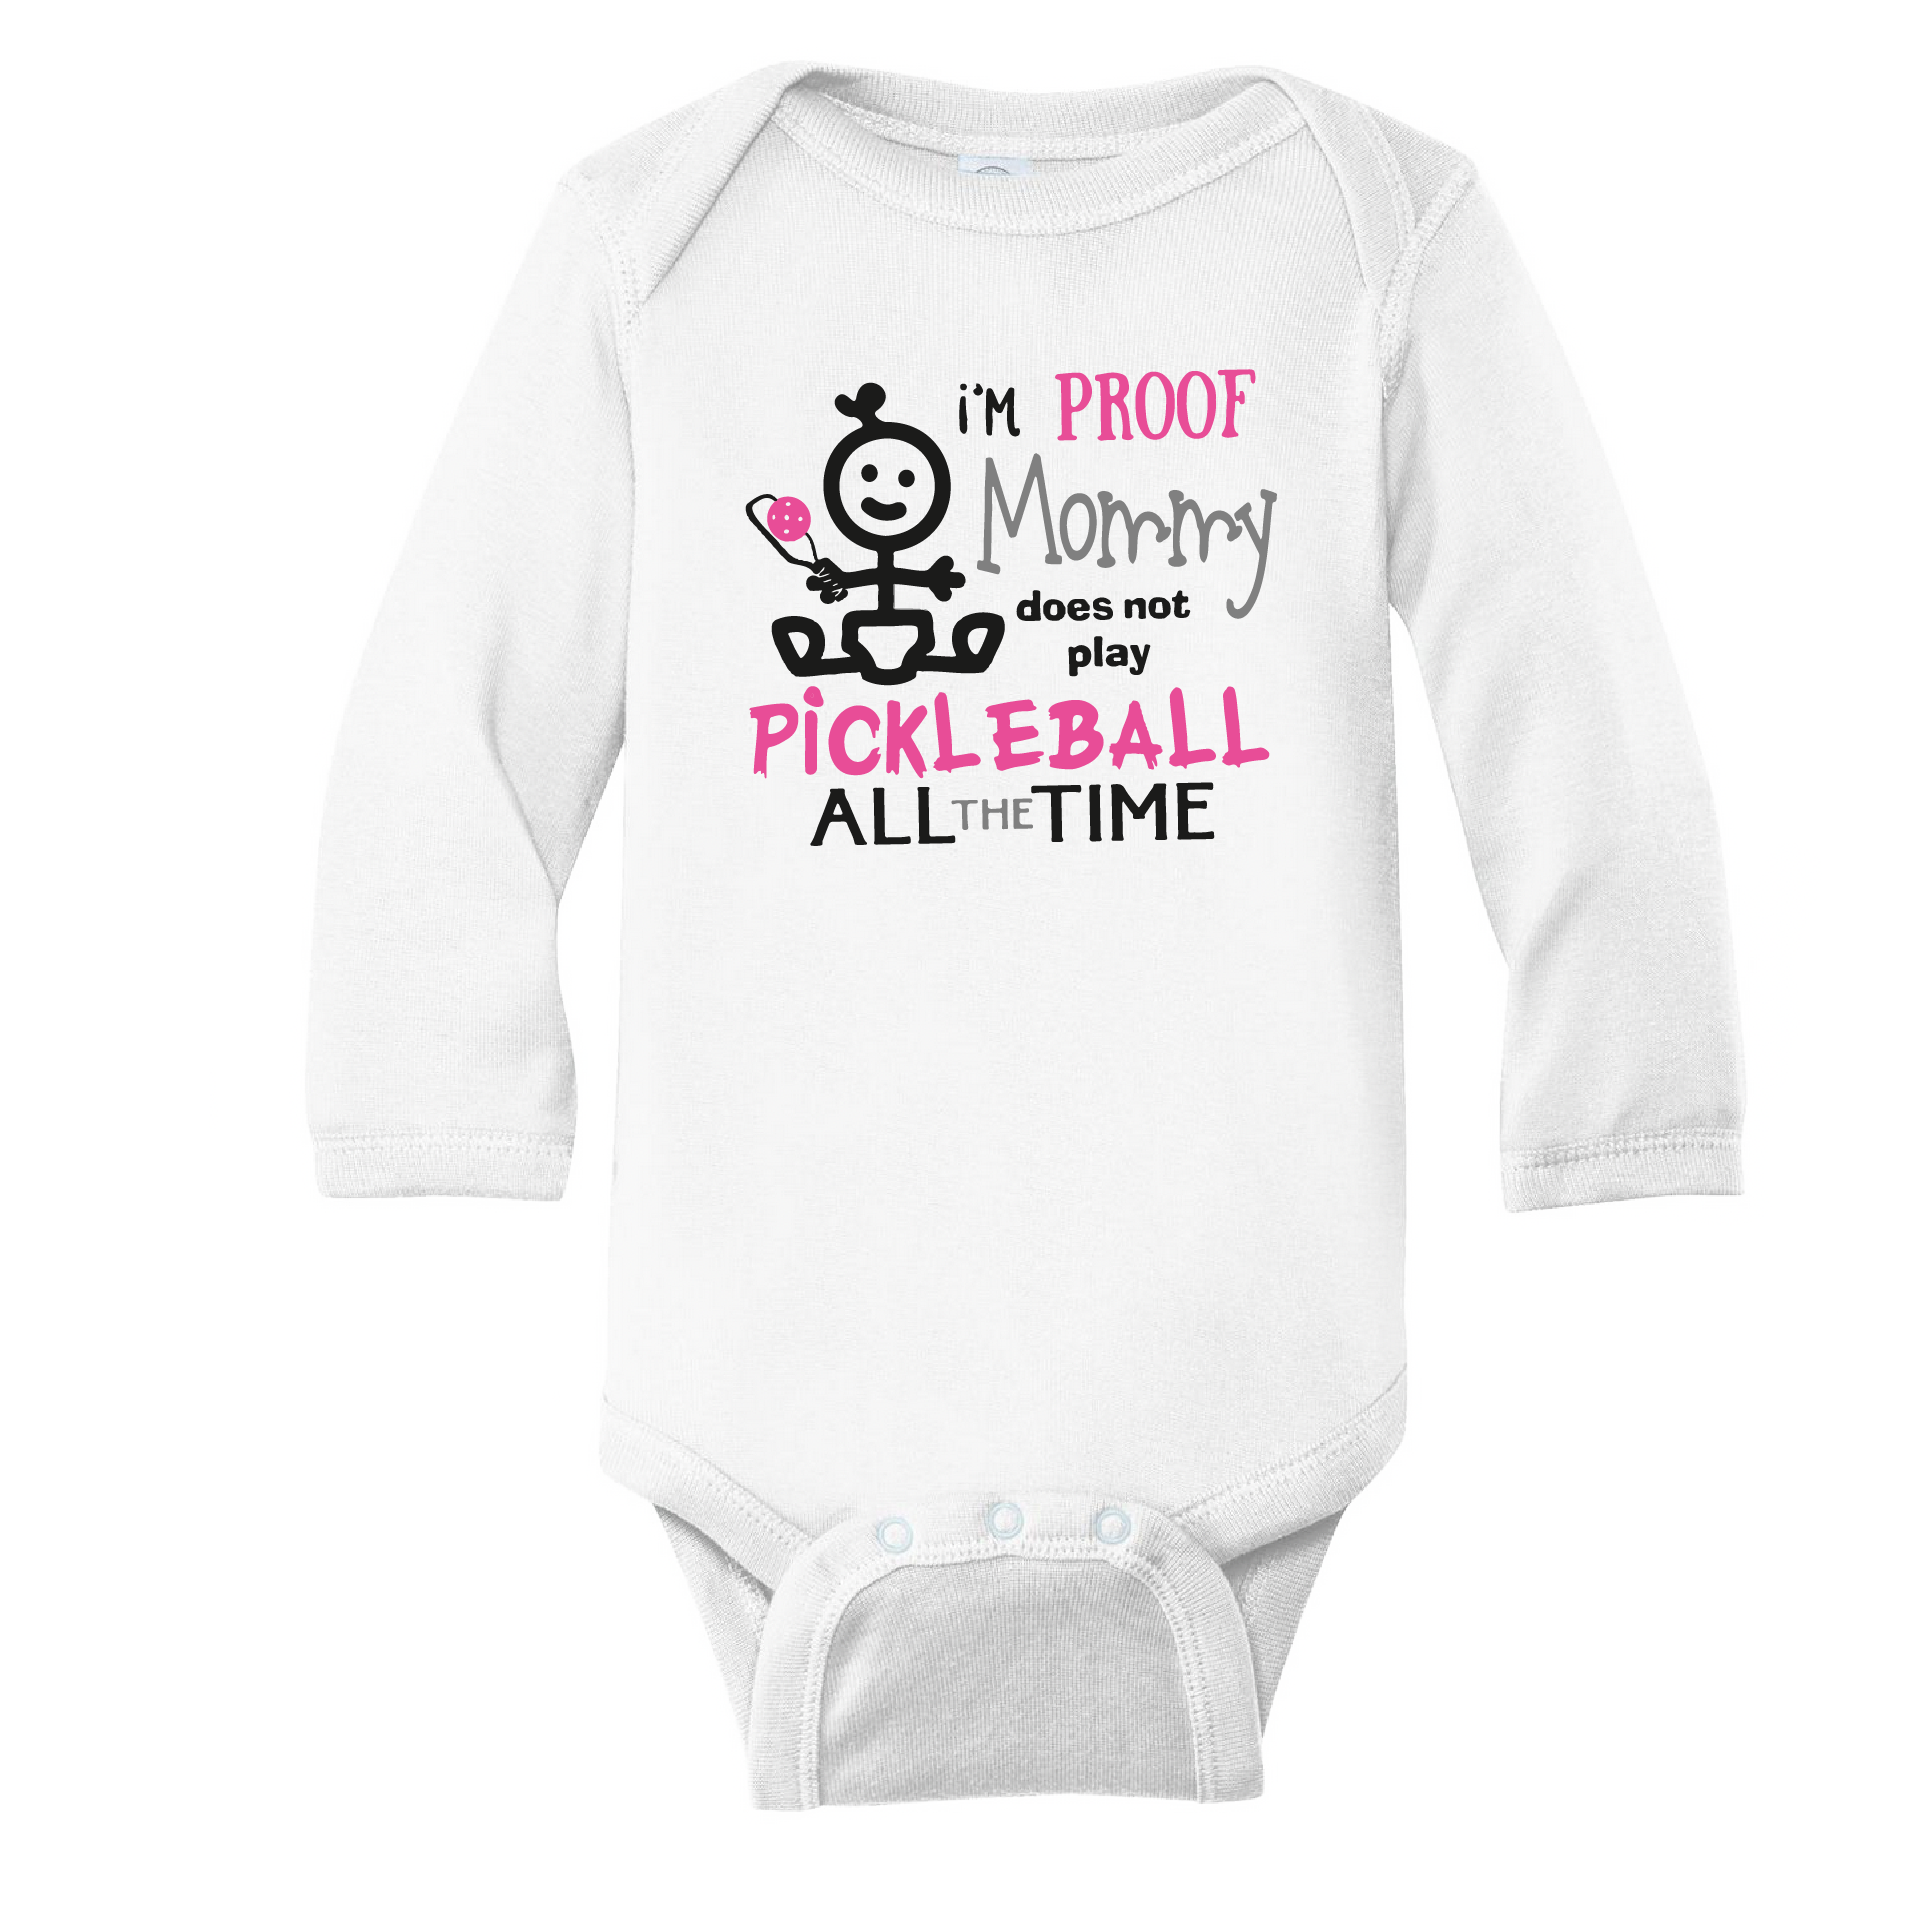 Pickleball Infant Design: I'm proof my Mommy doesn't always play pickleball  It’s a family affair! Show your love with these cute “Onesies” designed for the pickleball addict’s newest addition to the family. These unique designs are sure to please the fussiest of babies, parents and grandparents. Makes a perfect shower gift, birthday gift or just because gift.